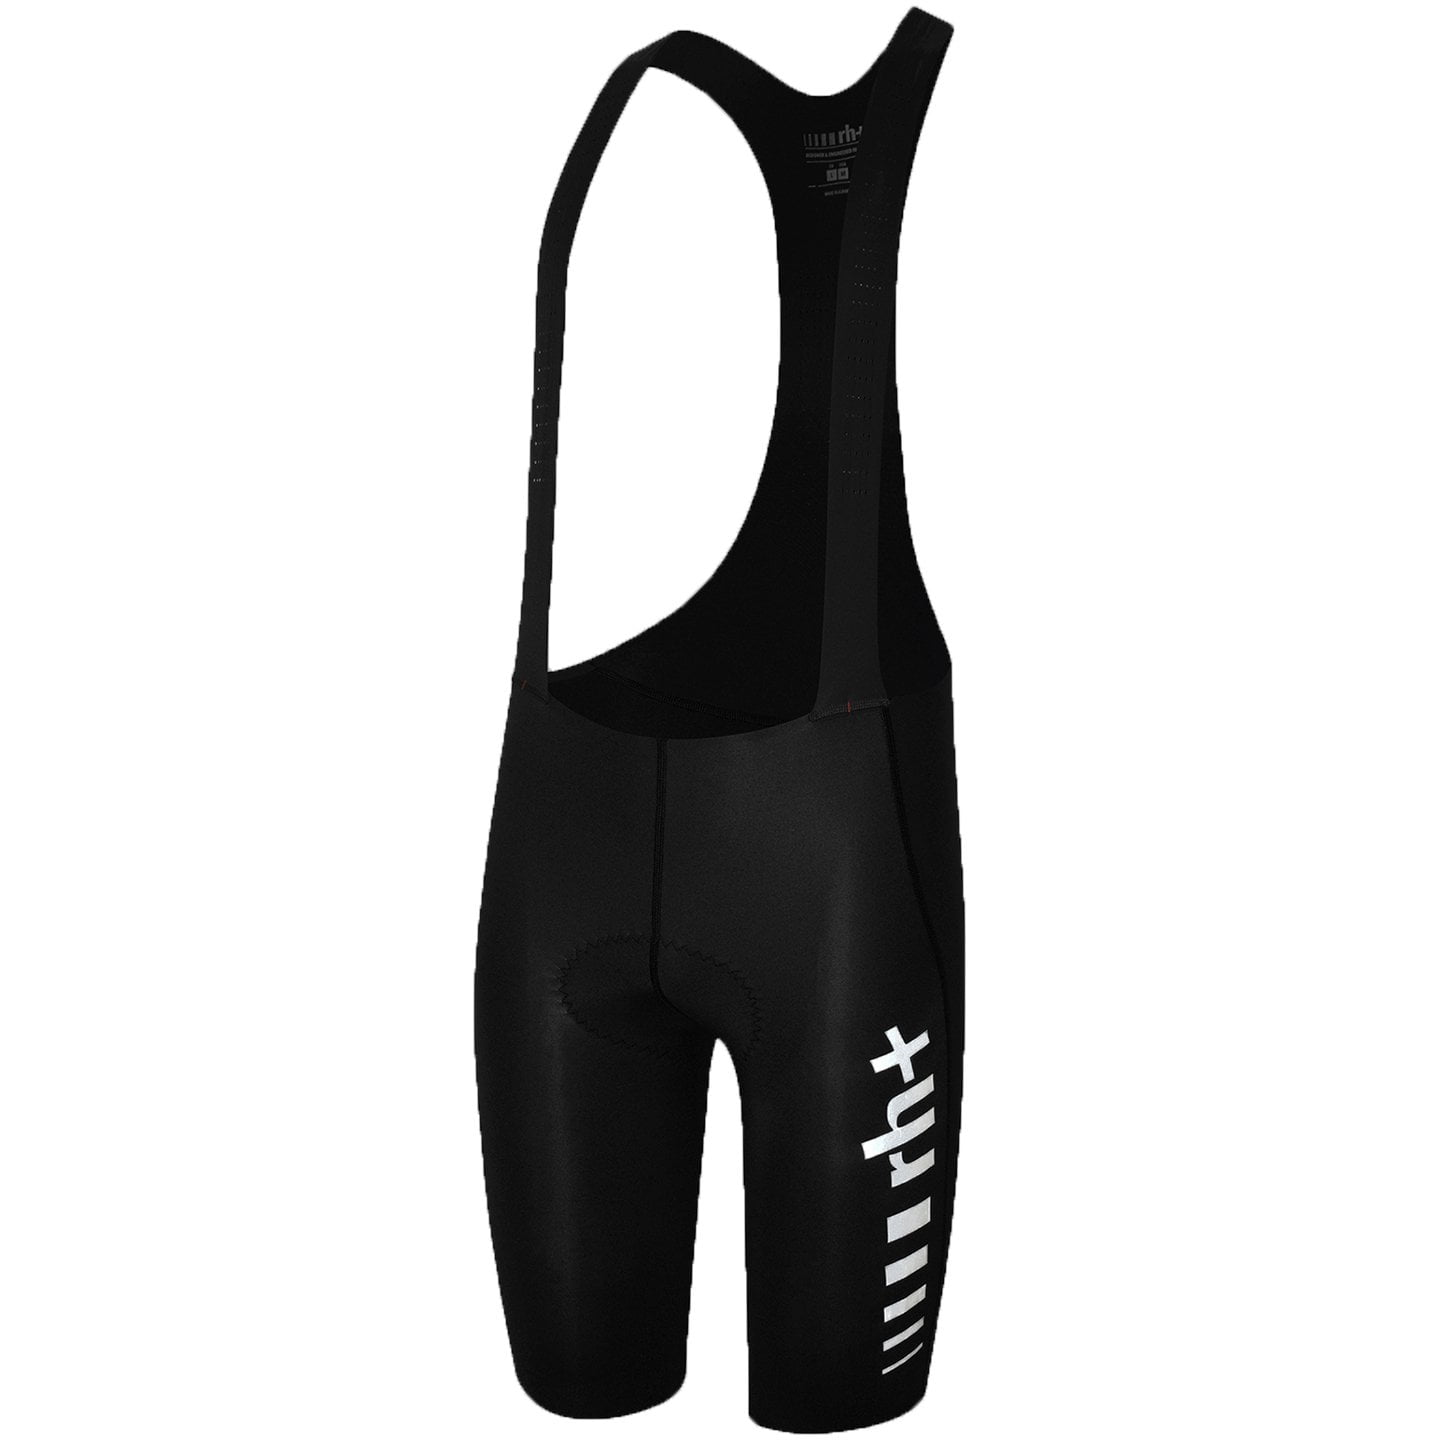 RH+ Code Bib Shorts, for men, size S, Cycle trousers, Cycle clothing